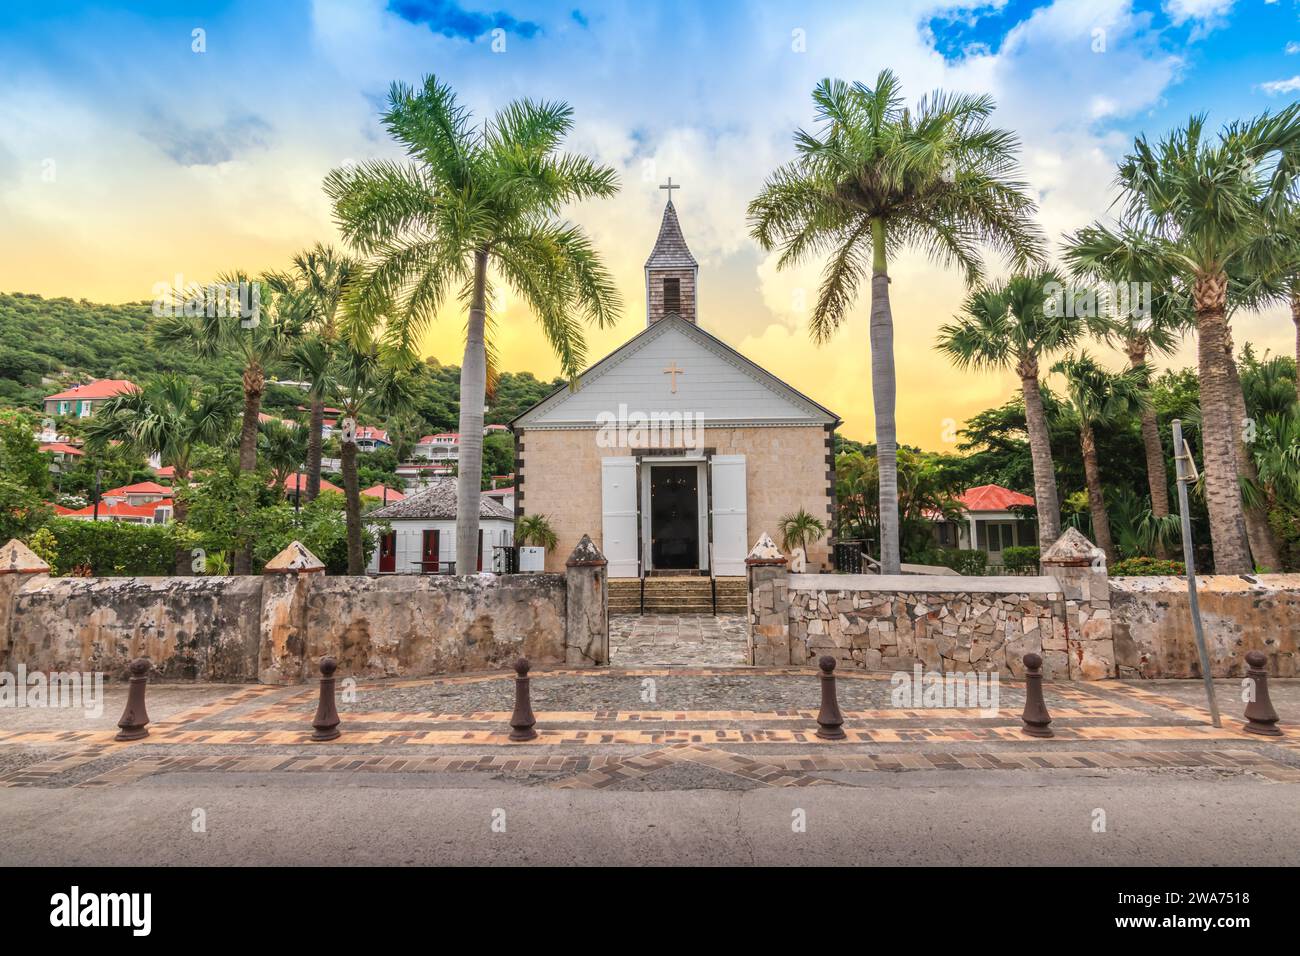 Anglican church in Gustavia, Saint Barthelemy at sunset. Stock Photo